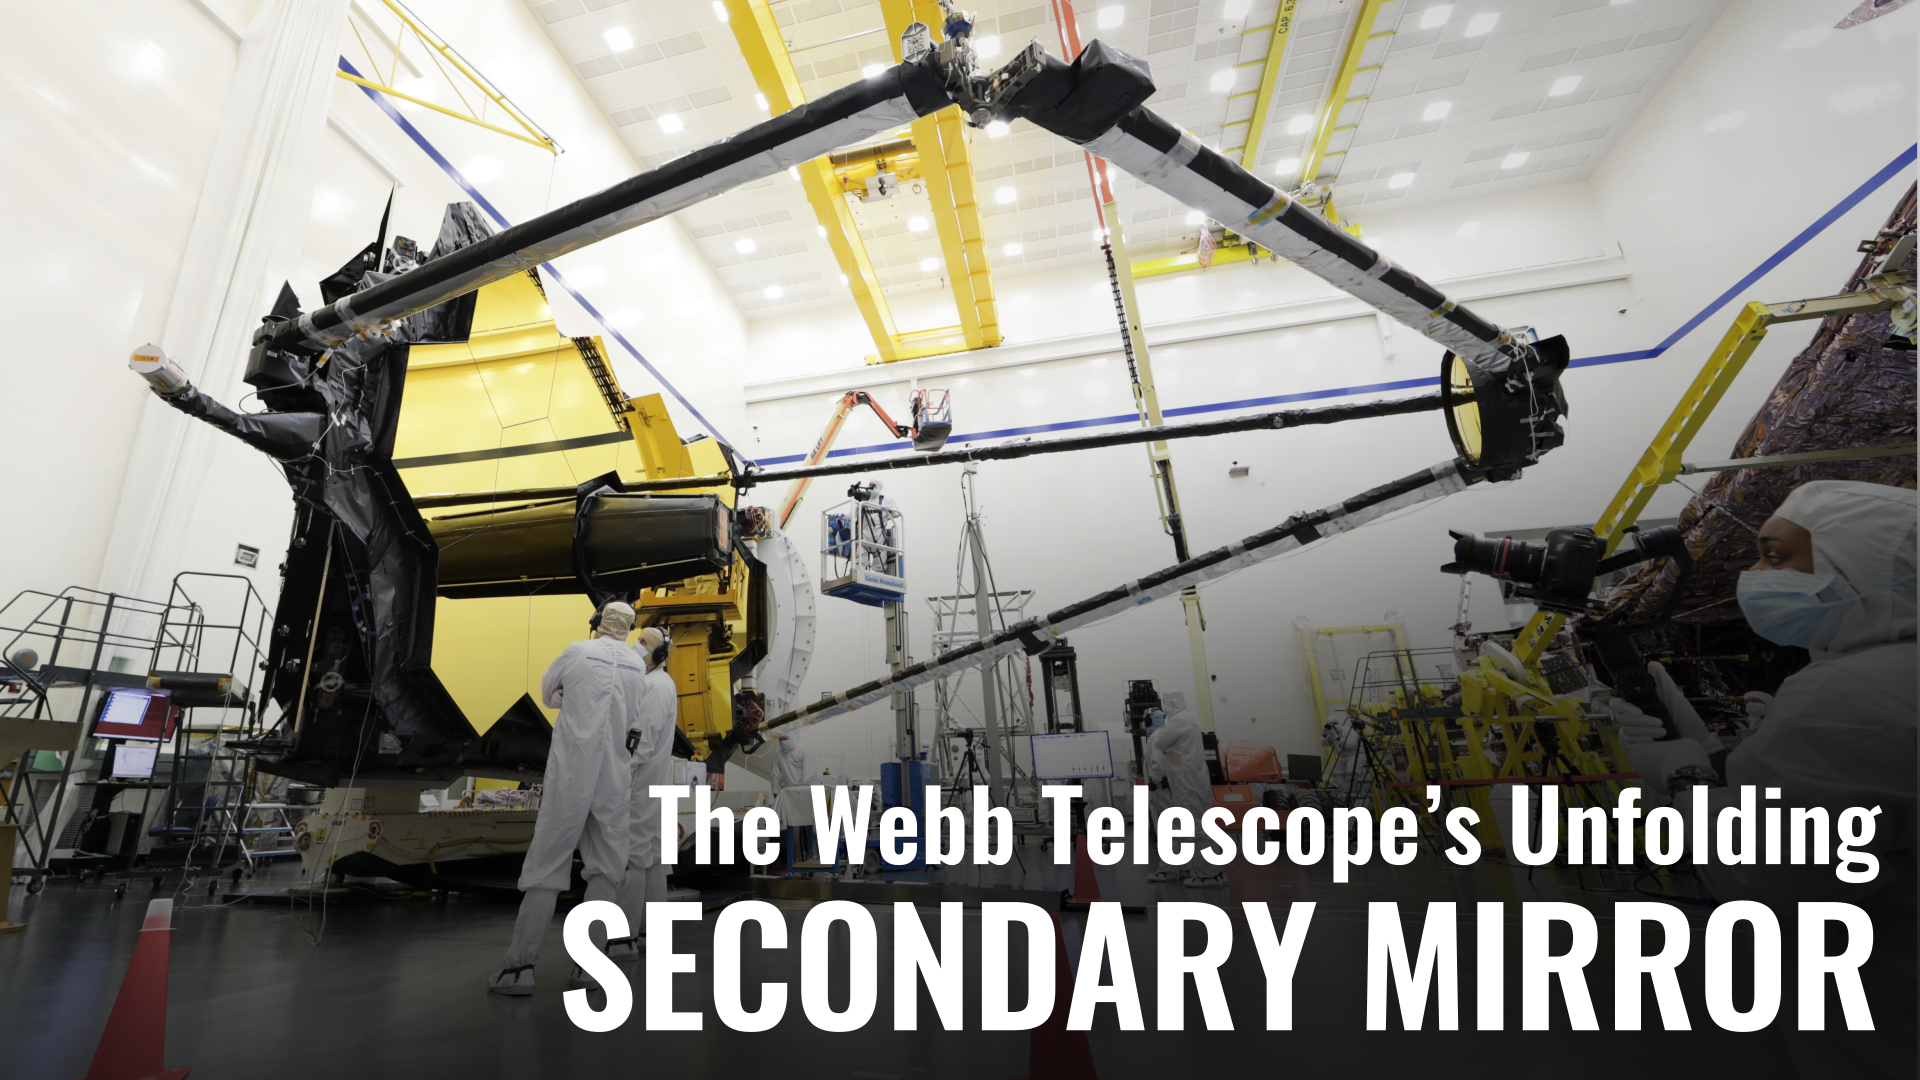 Social Media feature of the James Webb Space Telescope's secondary mirror being deployed inside the cleanroom at Northrop Grumman in Redondo Beach, CA.  Music:  Treacherous Path by Giles Robert Lamb Killer TracksComplete transcript available.